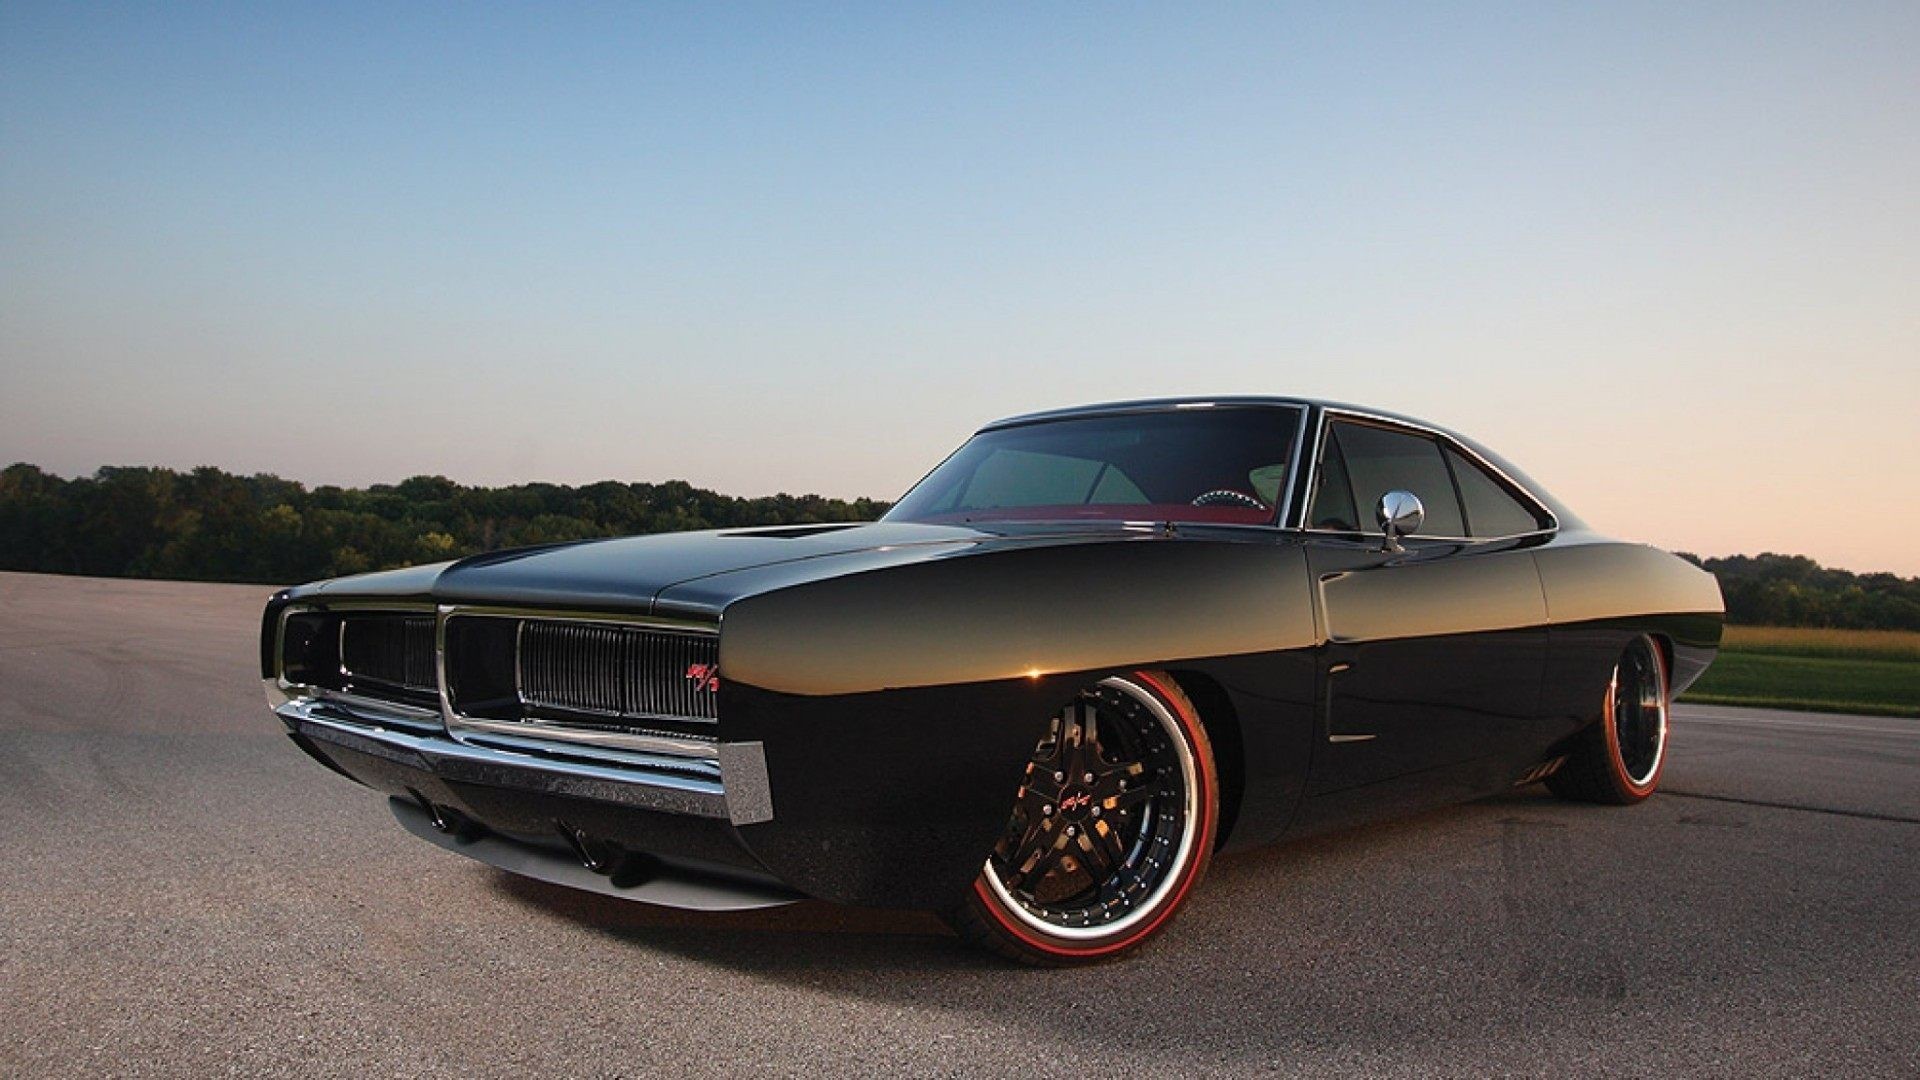 1920x1080 1969 dodge charger daytona Archives - HD Wallpapers & 4K Wallpaper .